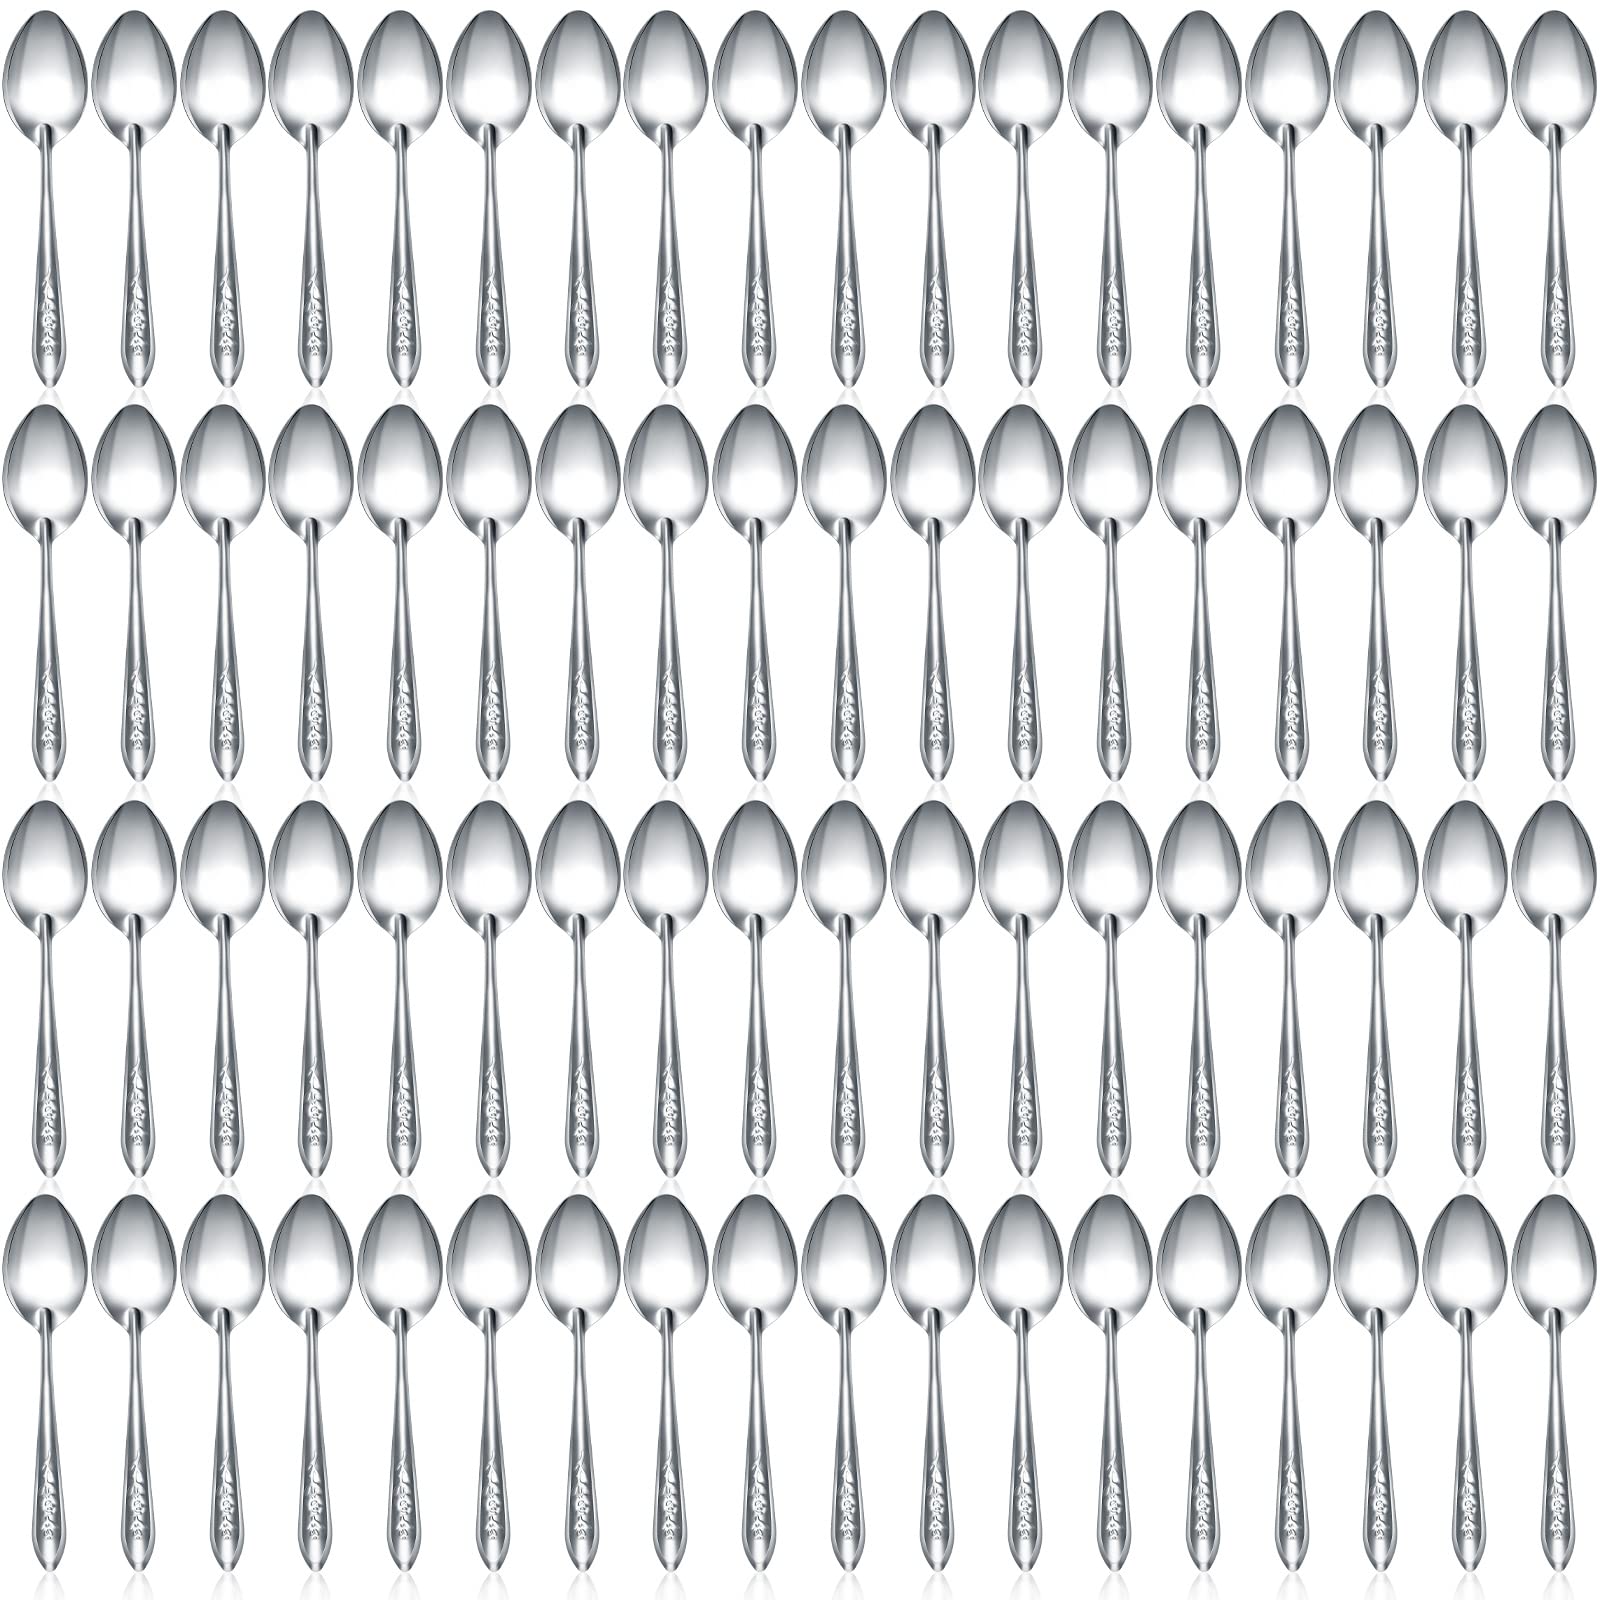 100 Pieces Dinner Spoons Set 6.69 Inches Silverware Spoons Bulk Stainless Steel Tablespoons Food Grade Spoon for Home Restaurant Kitchen Dishwasher Safe